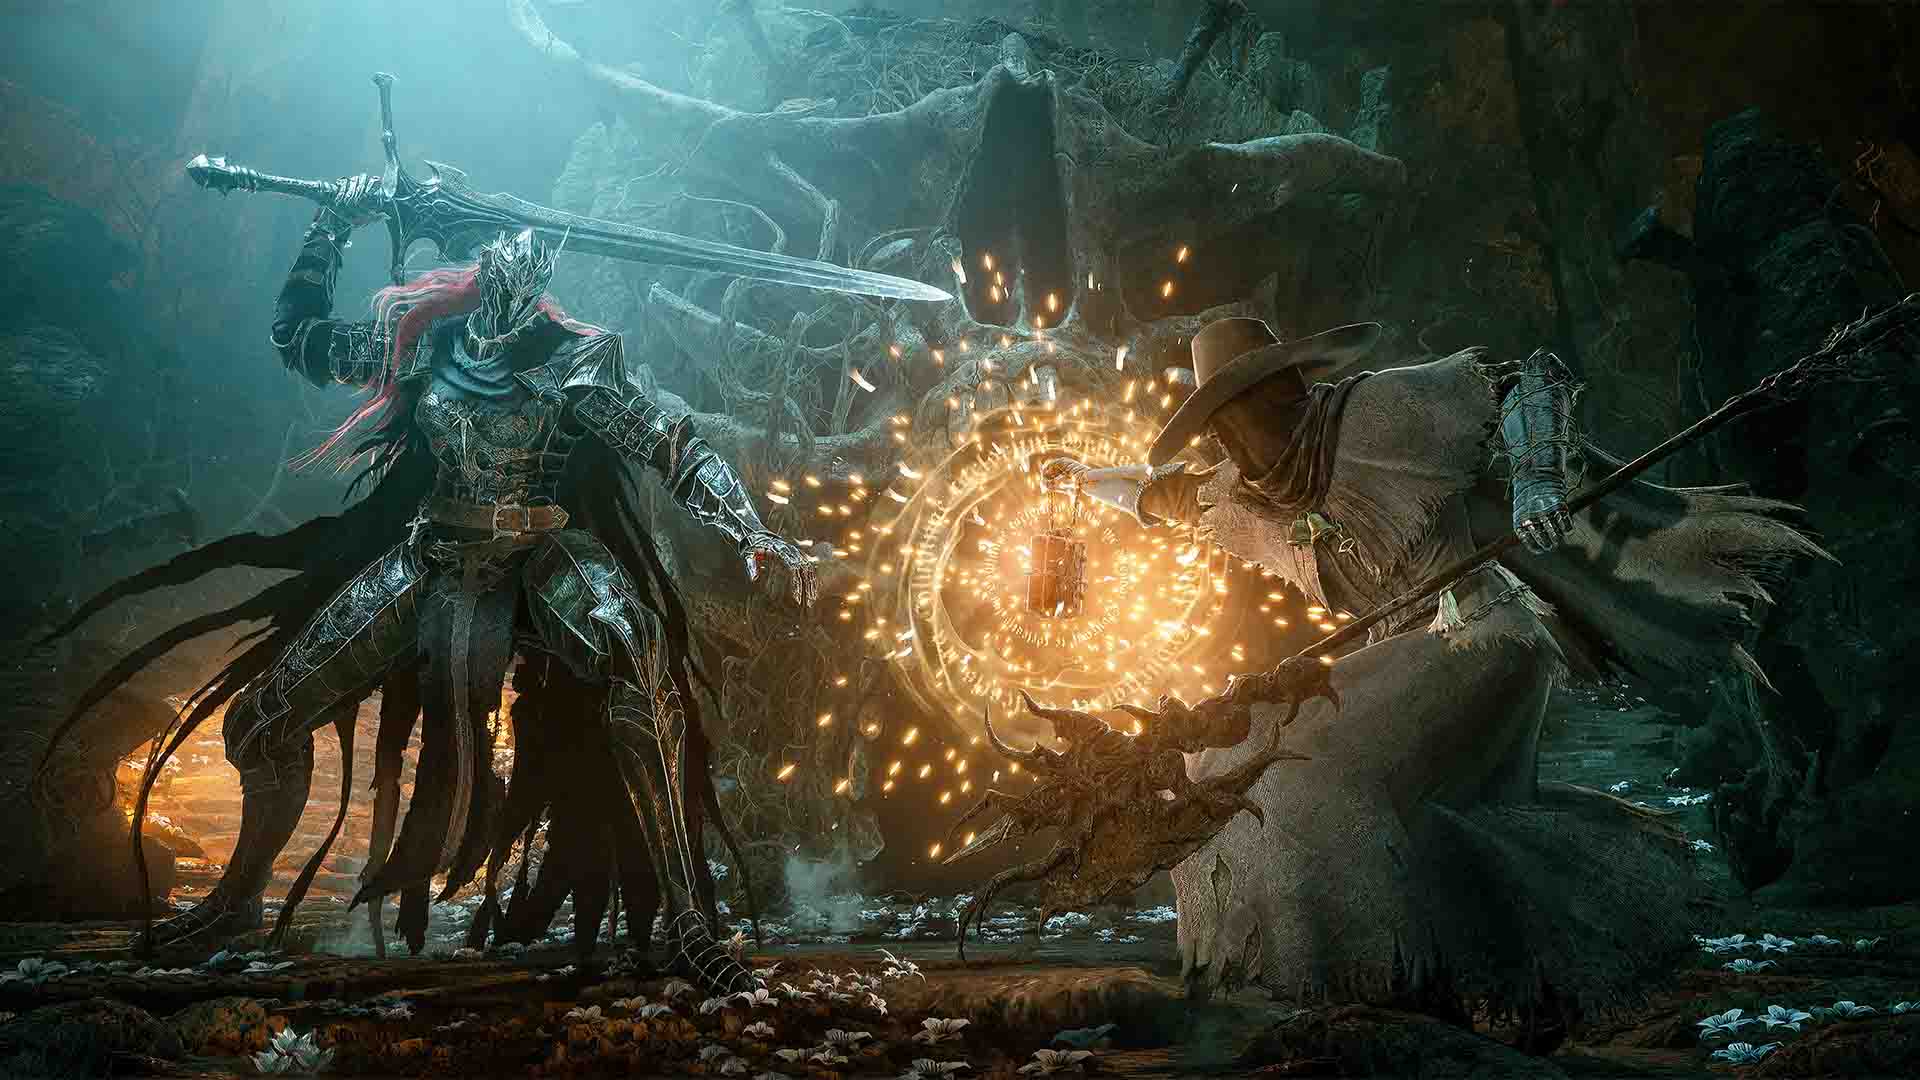 The Lords of The Fallen announced is a sequel to Lords of the Fallen